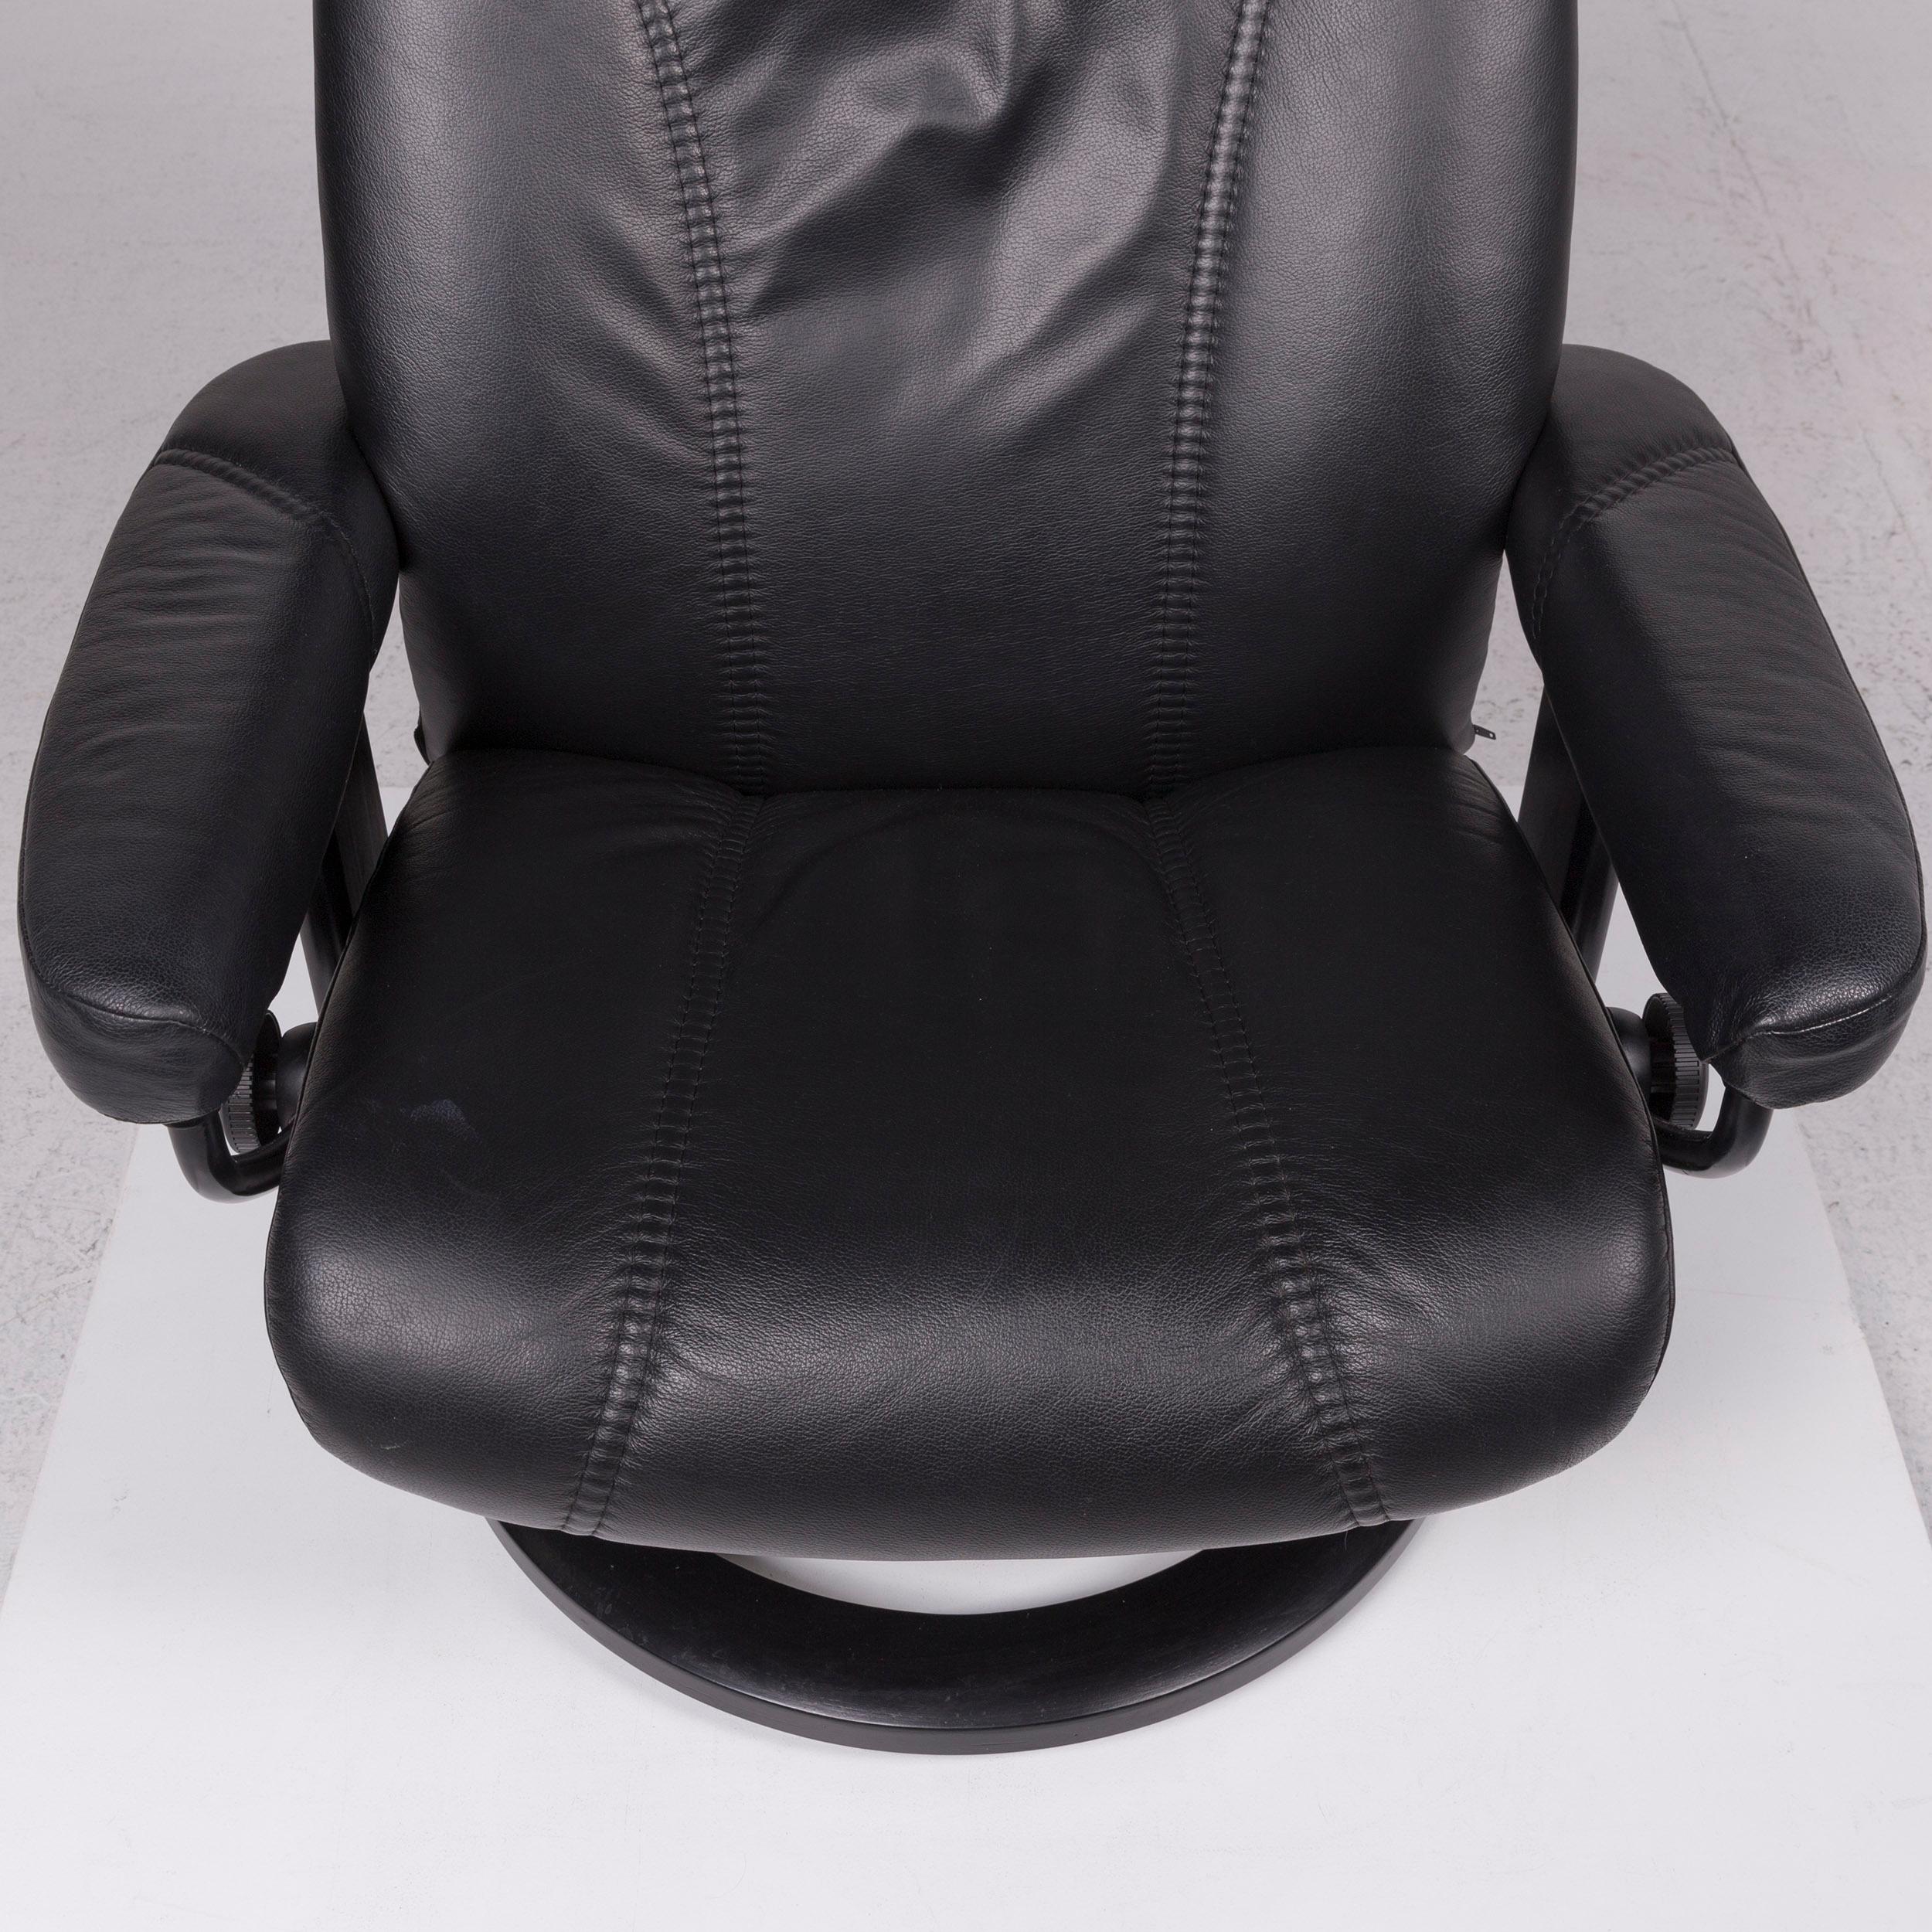 Contemporary Stressless Consul Leather Armchair Black Incl. Stool Size M Relax Function